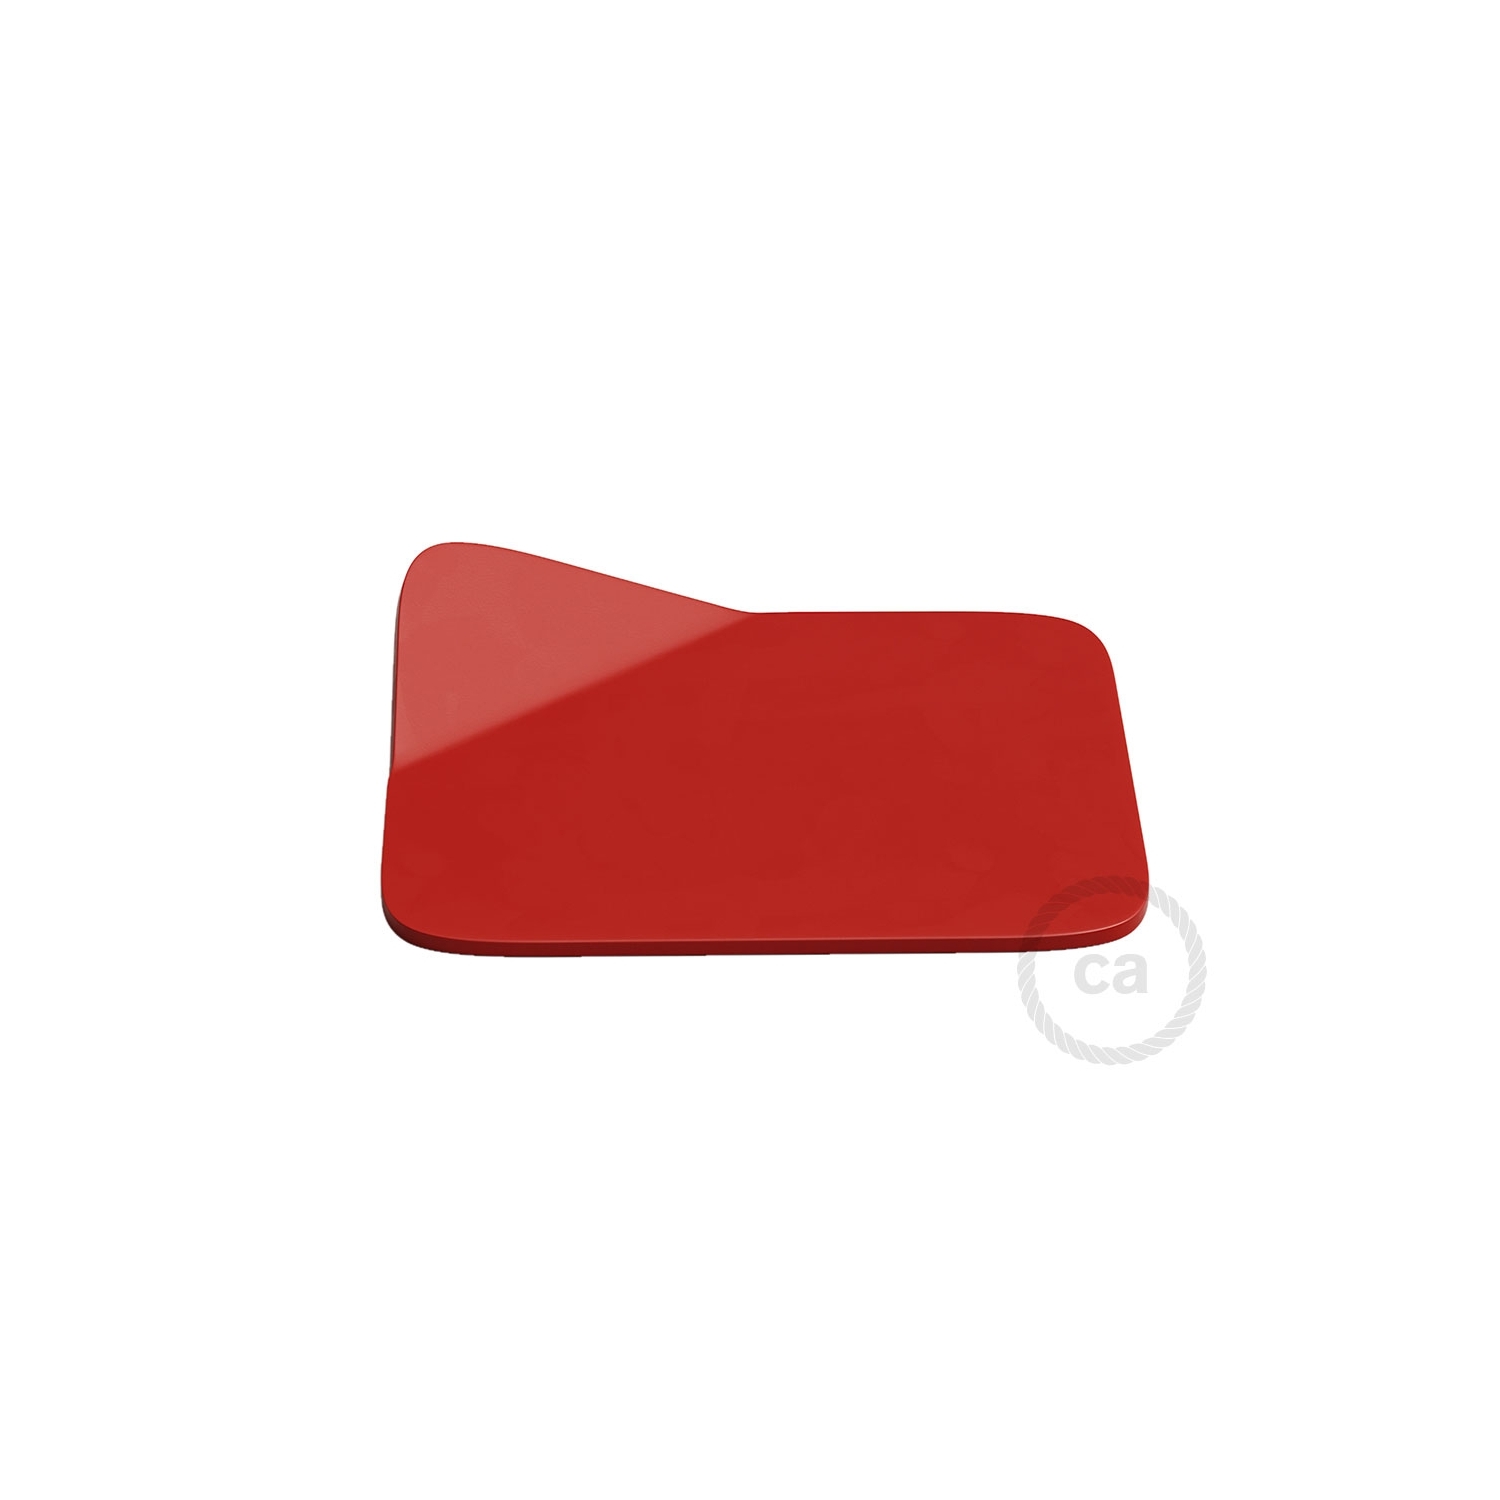 Magnetico®-Base Red, metal base for smooth surfaces for Magnetico®-Plug